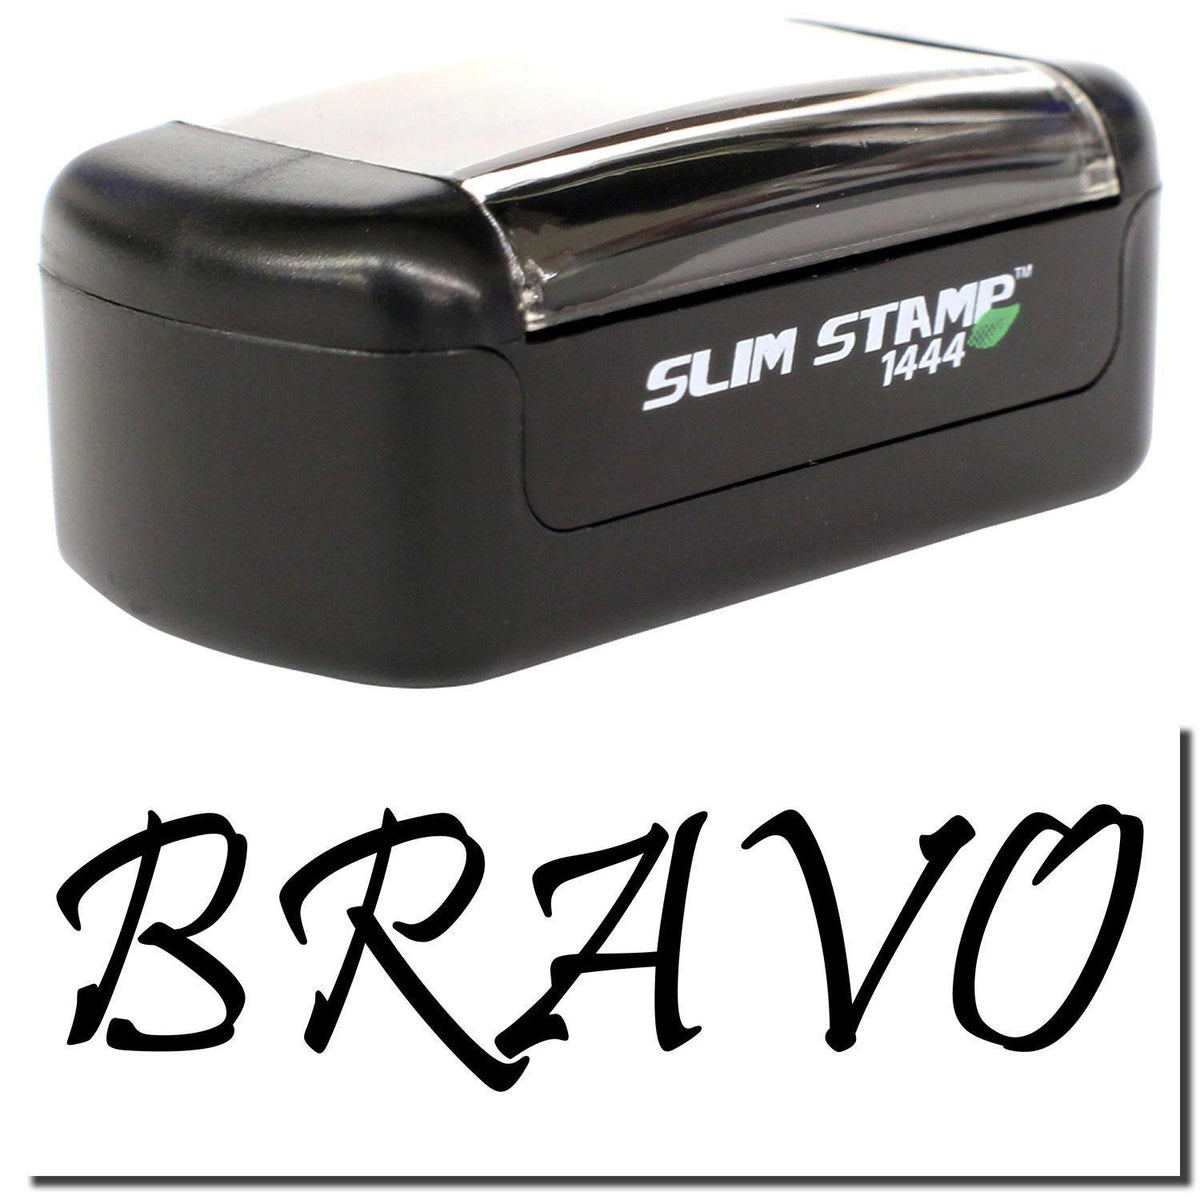 A stock office pre-inked stamp with a stamped image showing how the text &quot;BRAVO&quot; is displayed after stamping.